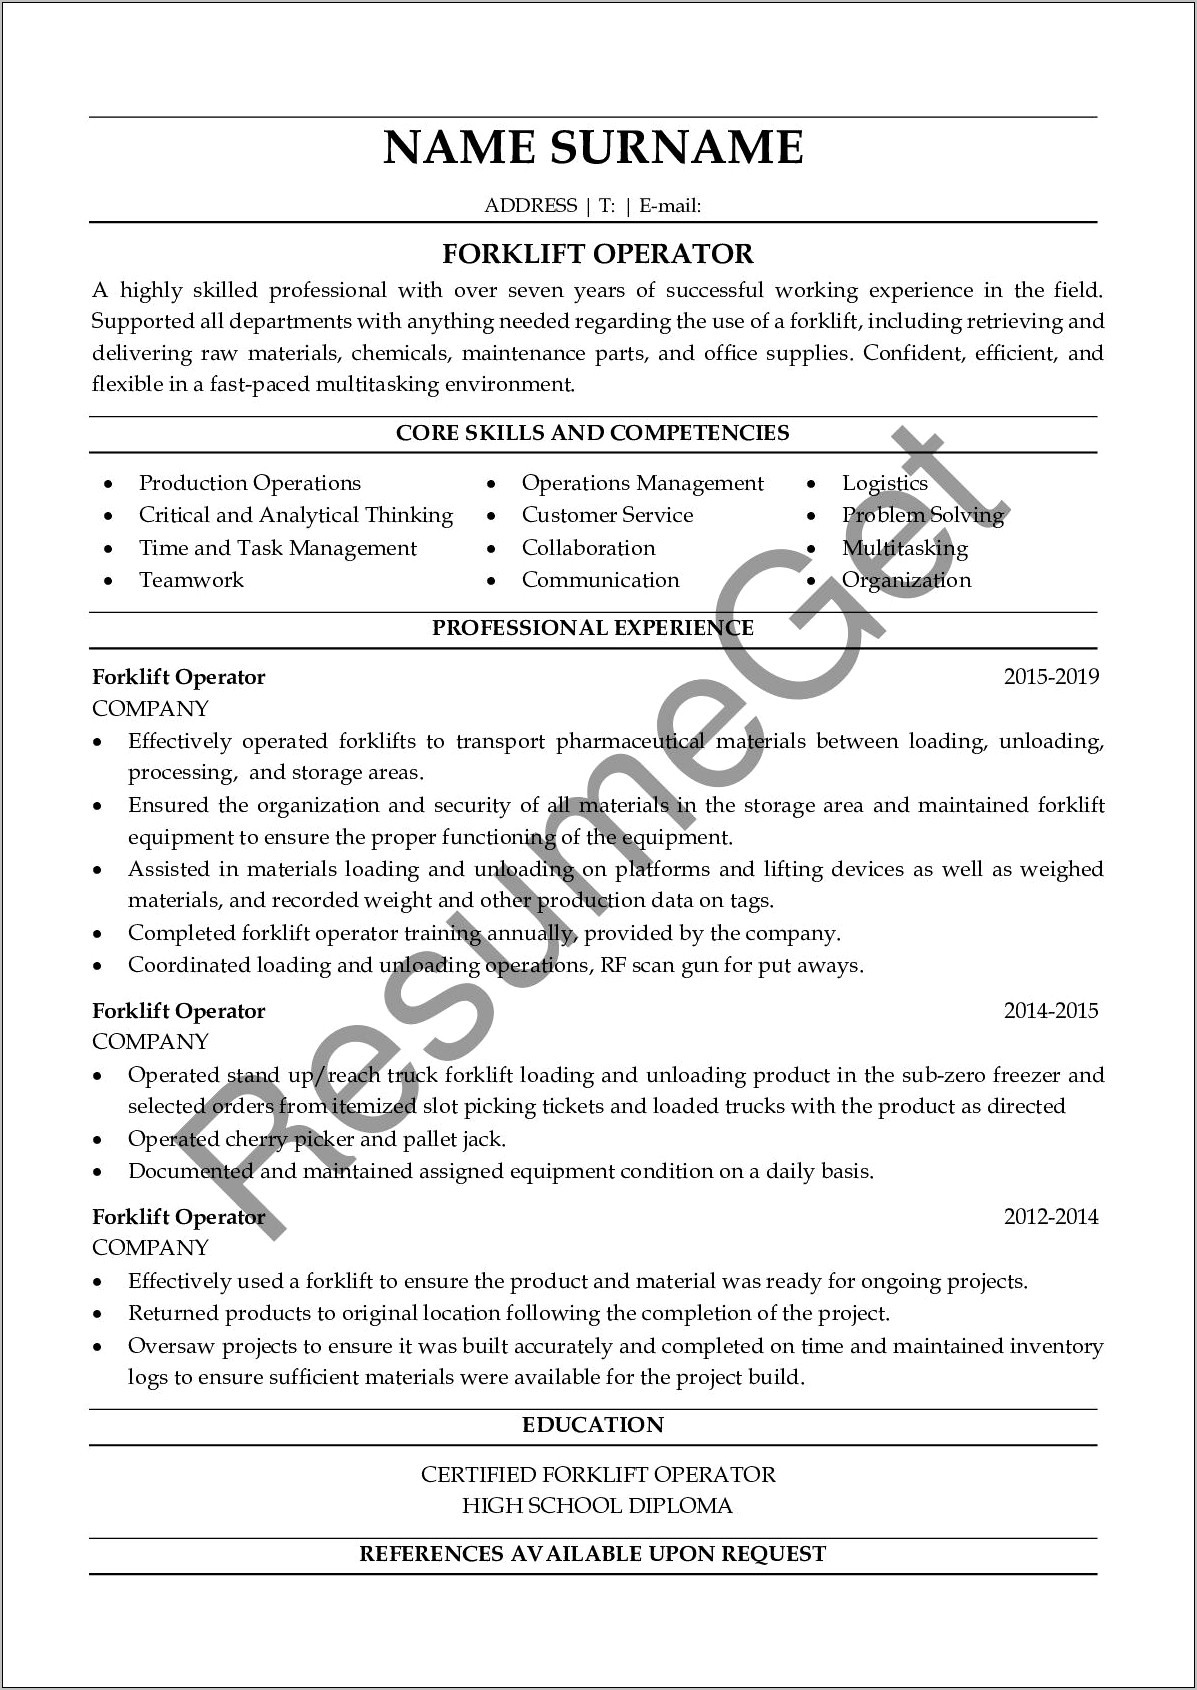 Examples Of Forklift Operator Functional Resume